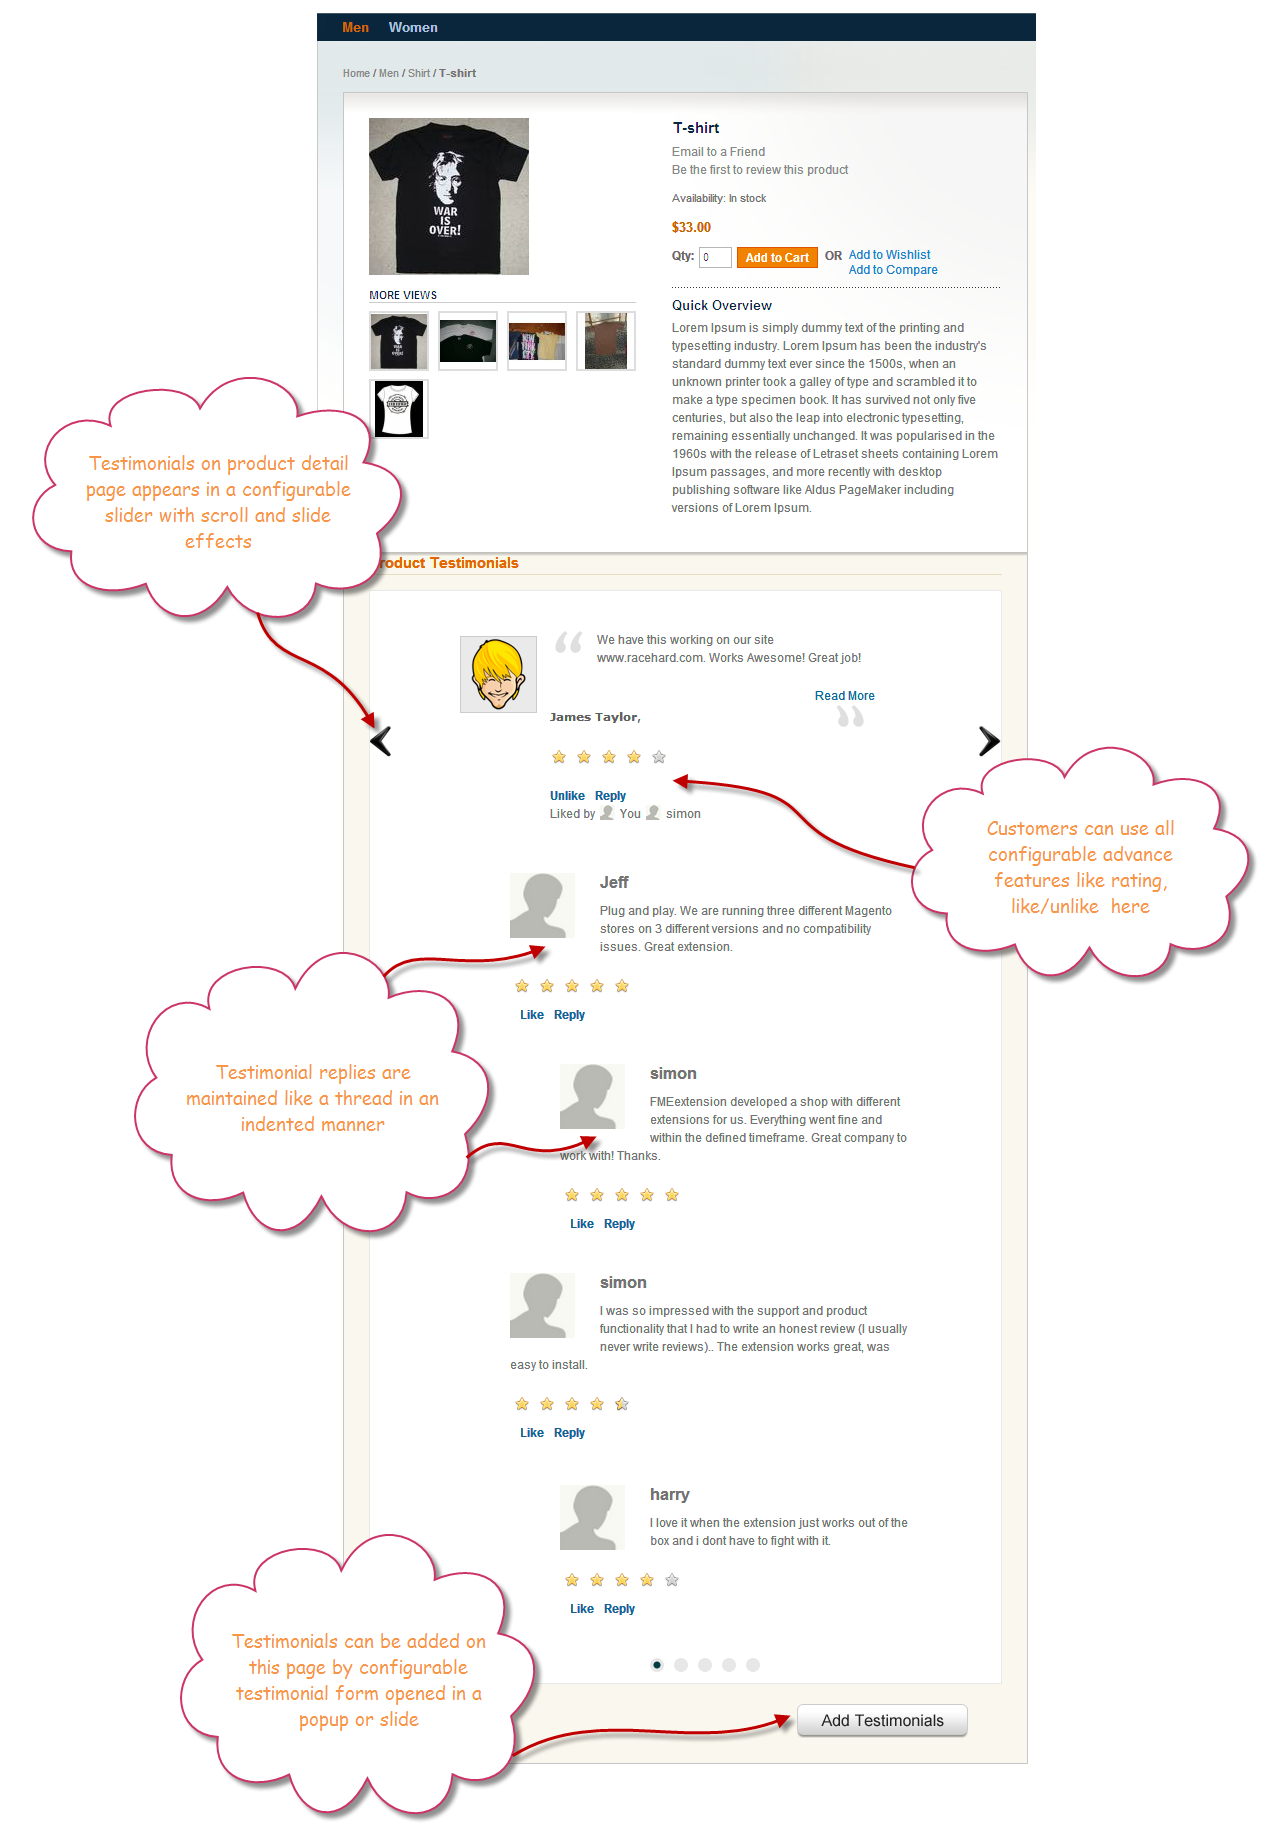 Product Testimonials v2.0 - Front End for Product Testimonials